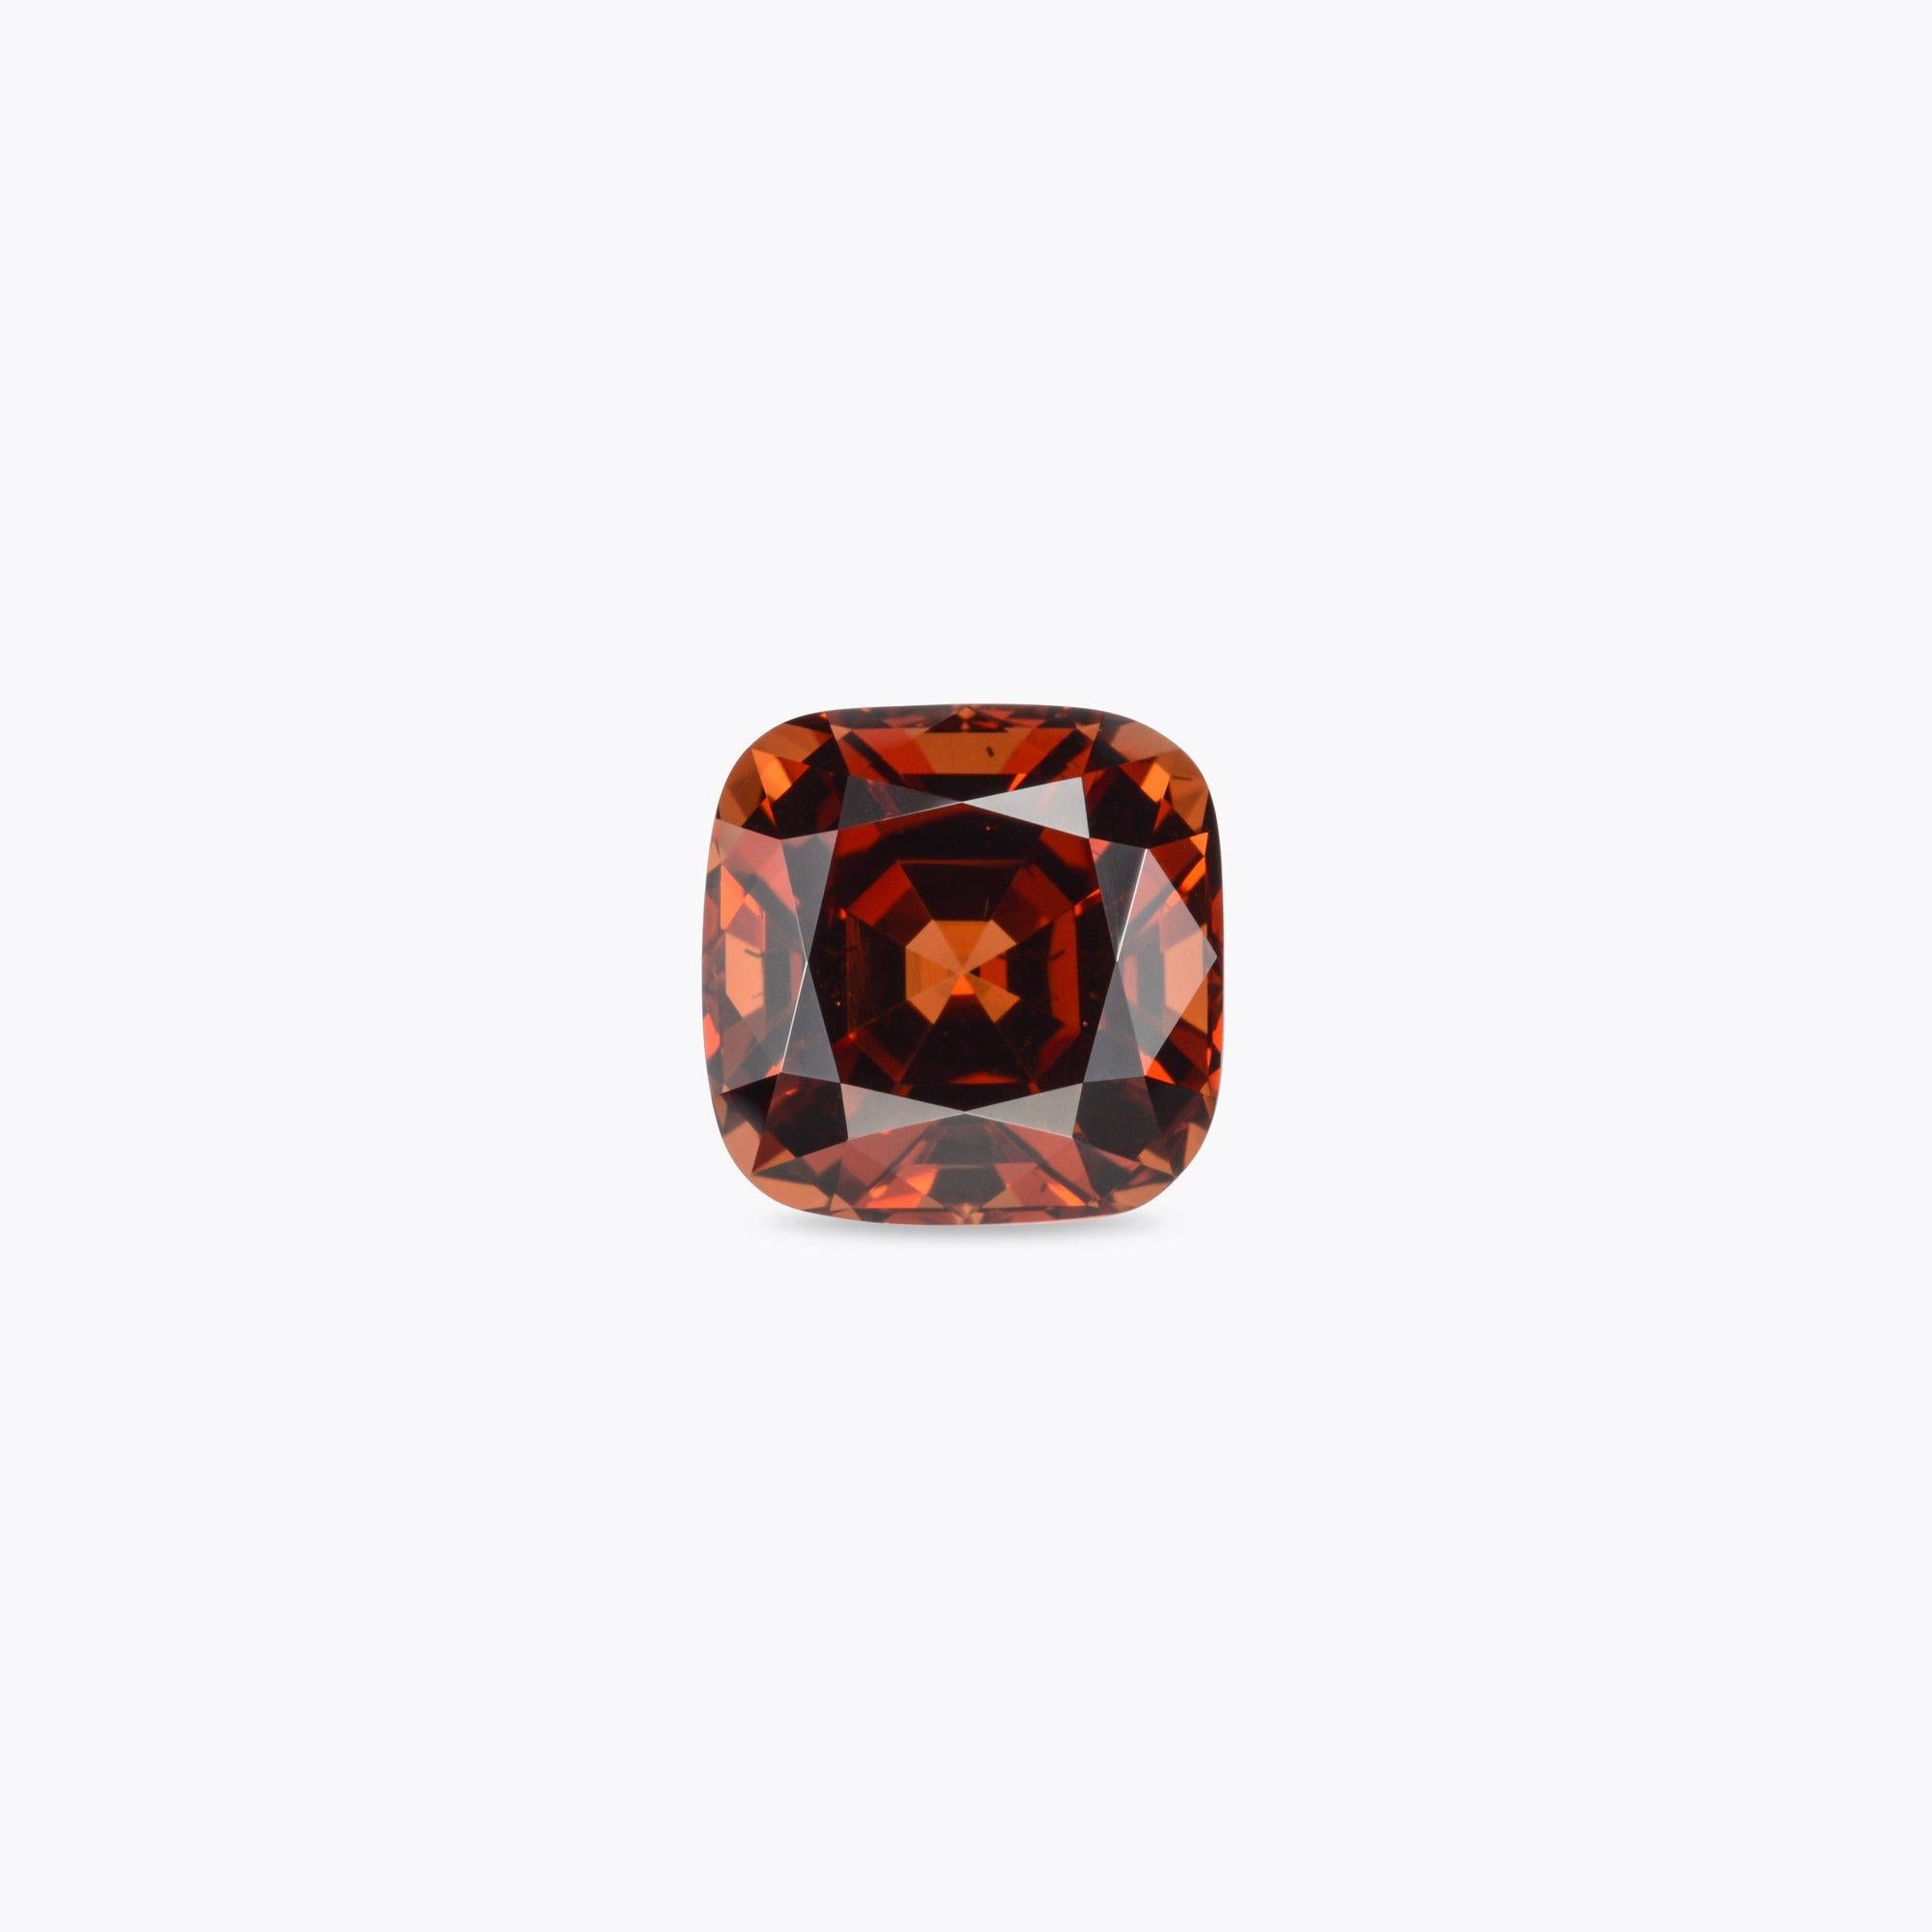 Intense reddish orange 4.02 carat Malaya Garnet gem, offered loose to a classy lady or gentleman.
Returns are accepted and paid by us within 7 days of delivery.
We offer supreme custom jewelry work upon request. Please contact us for more